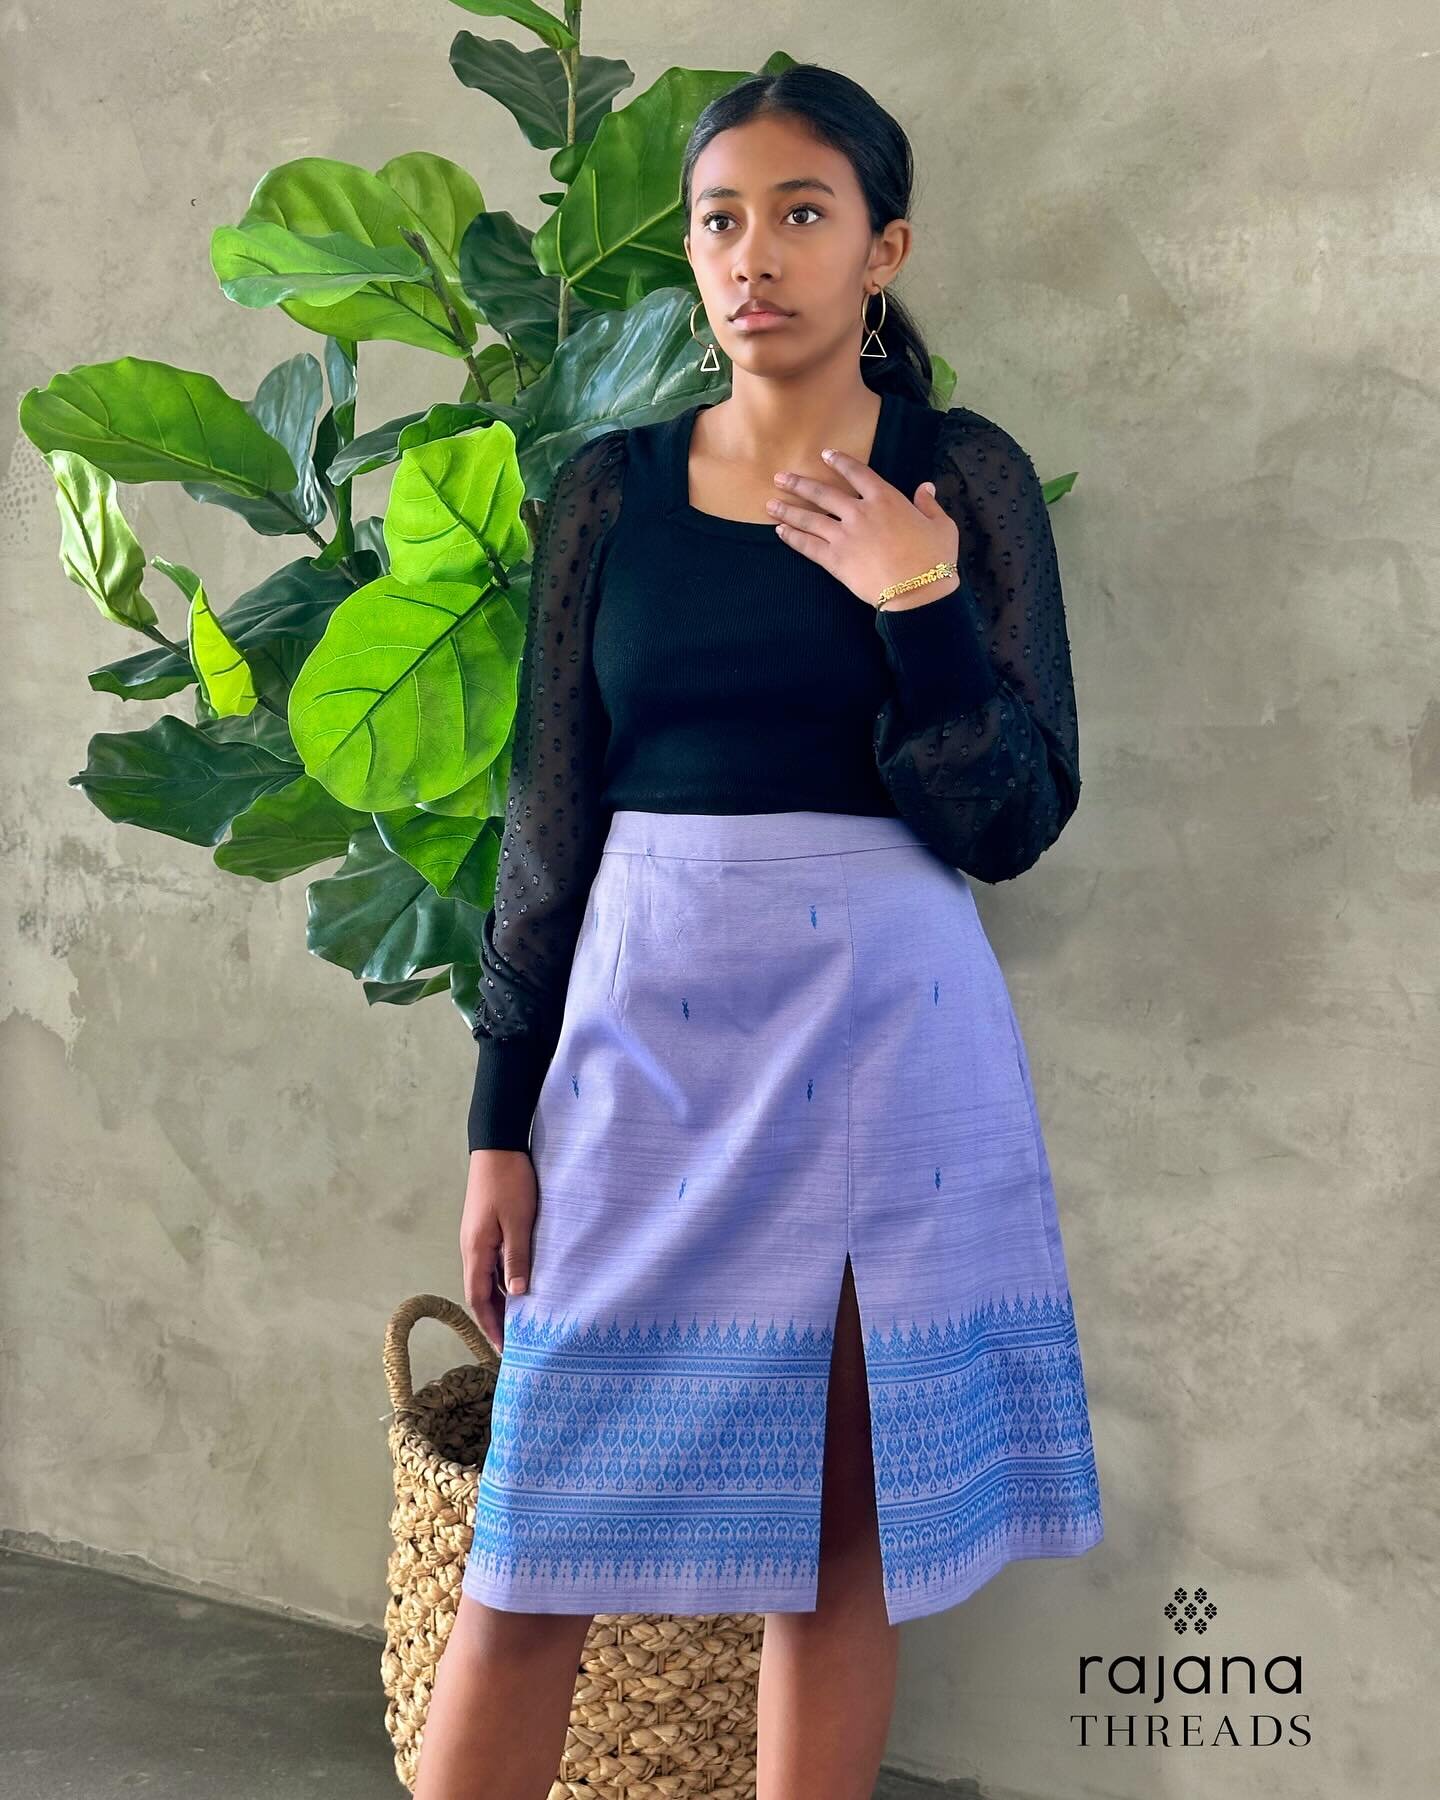 SEA New Year is upon us! Shop ethically with #rajanathreads 💜

We have skirts to jackets and culottes. And if you haven&rsquo;t already, check our MANIVANN skirt. Perfect for those looking for something a little modern for the festivities!

Featurin